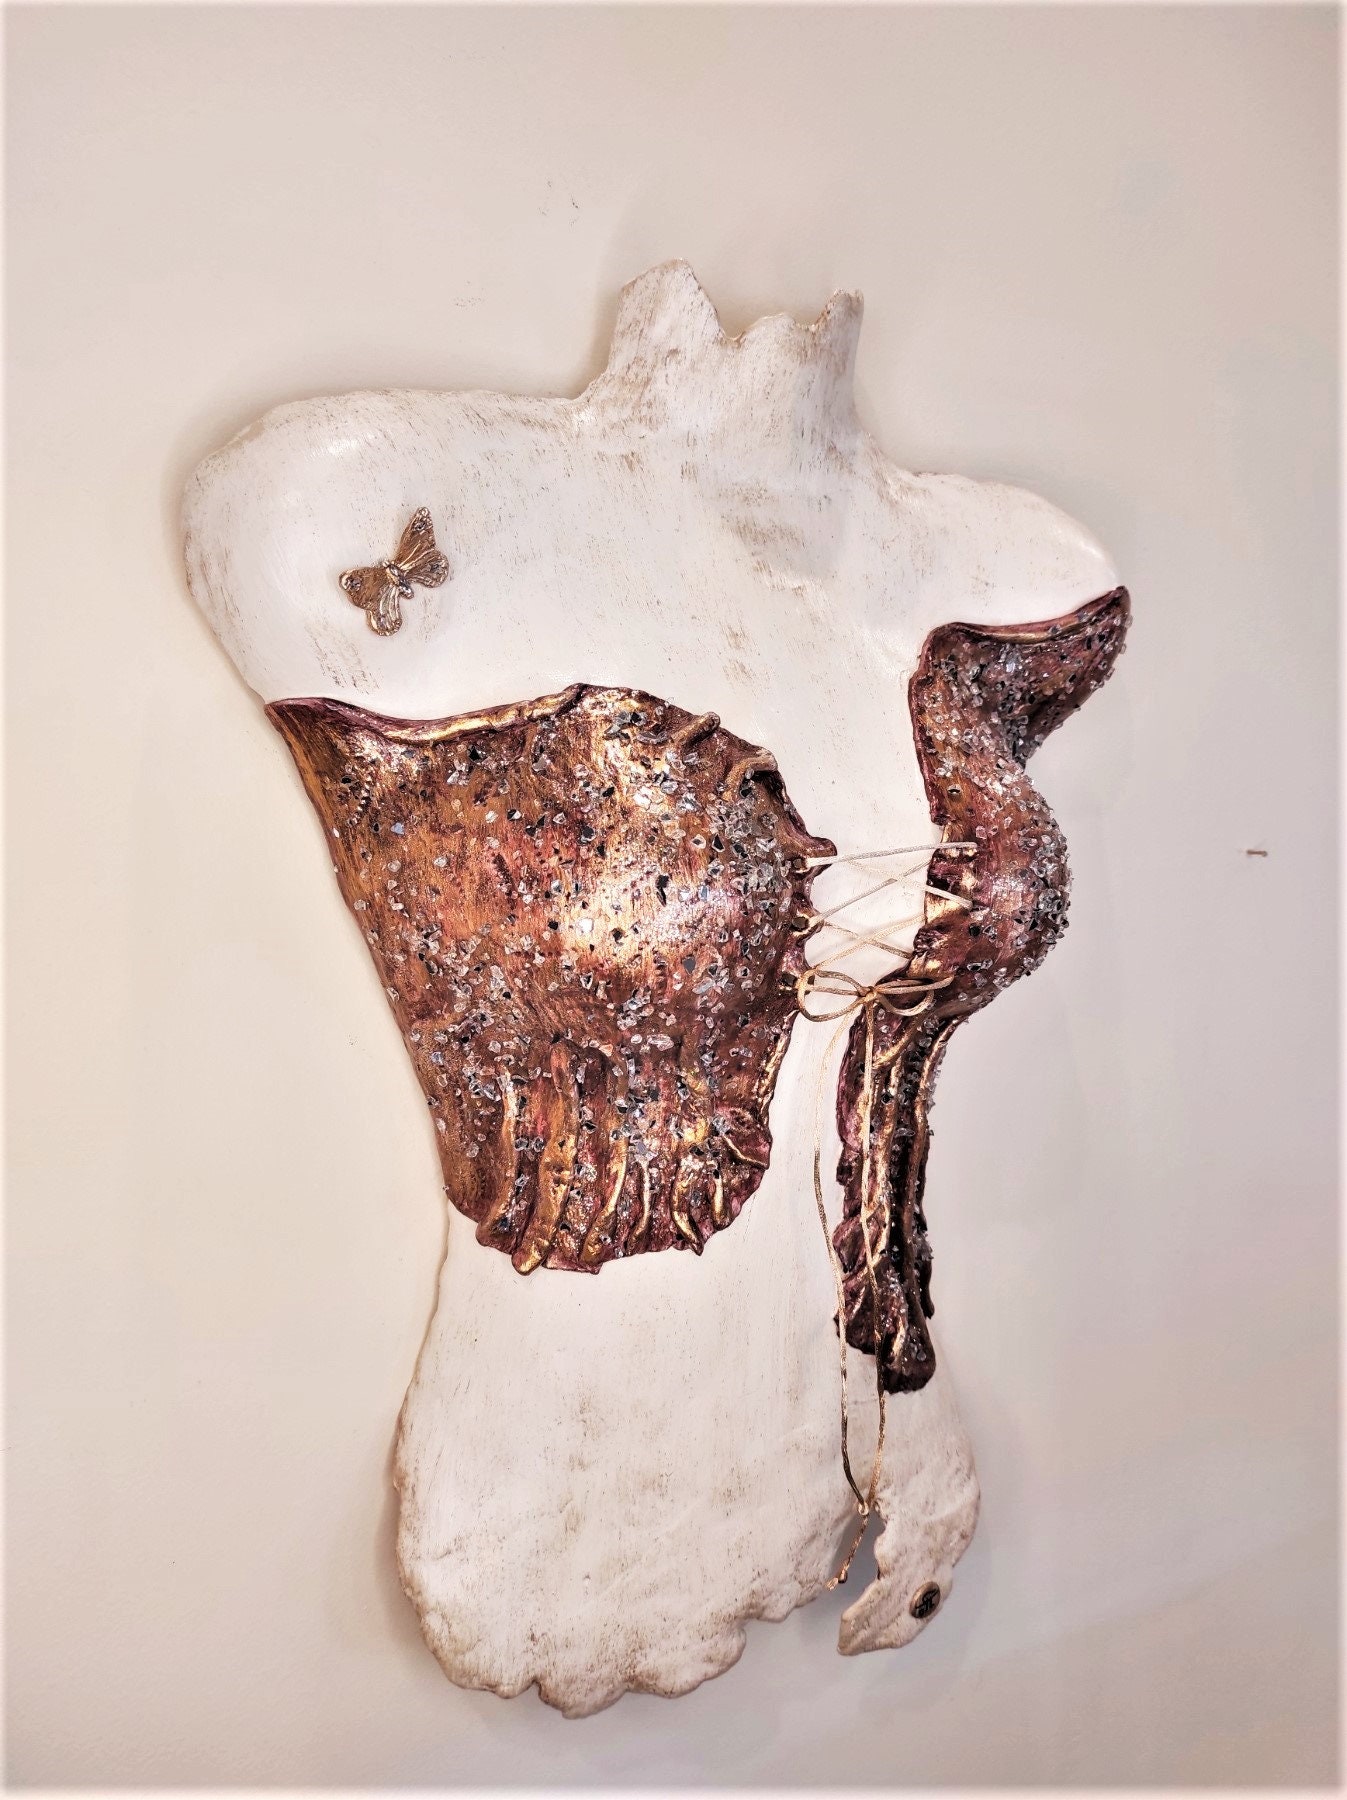 Life Size Μannequin Torso Sculpture XL With Crystalsceramic